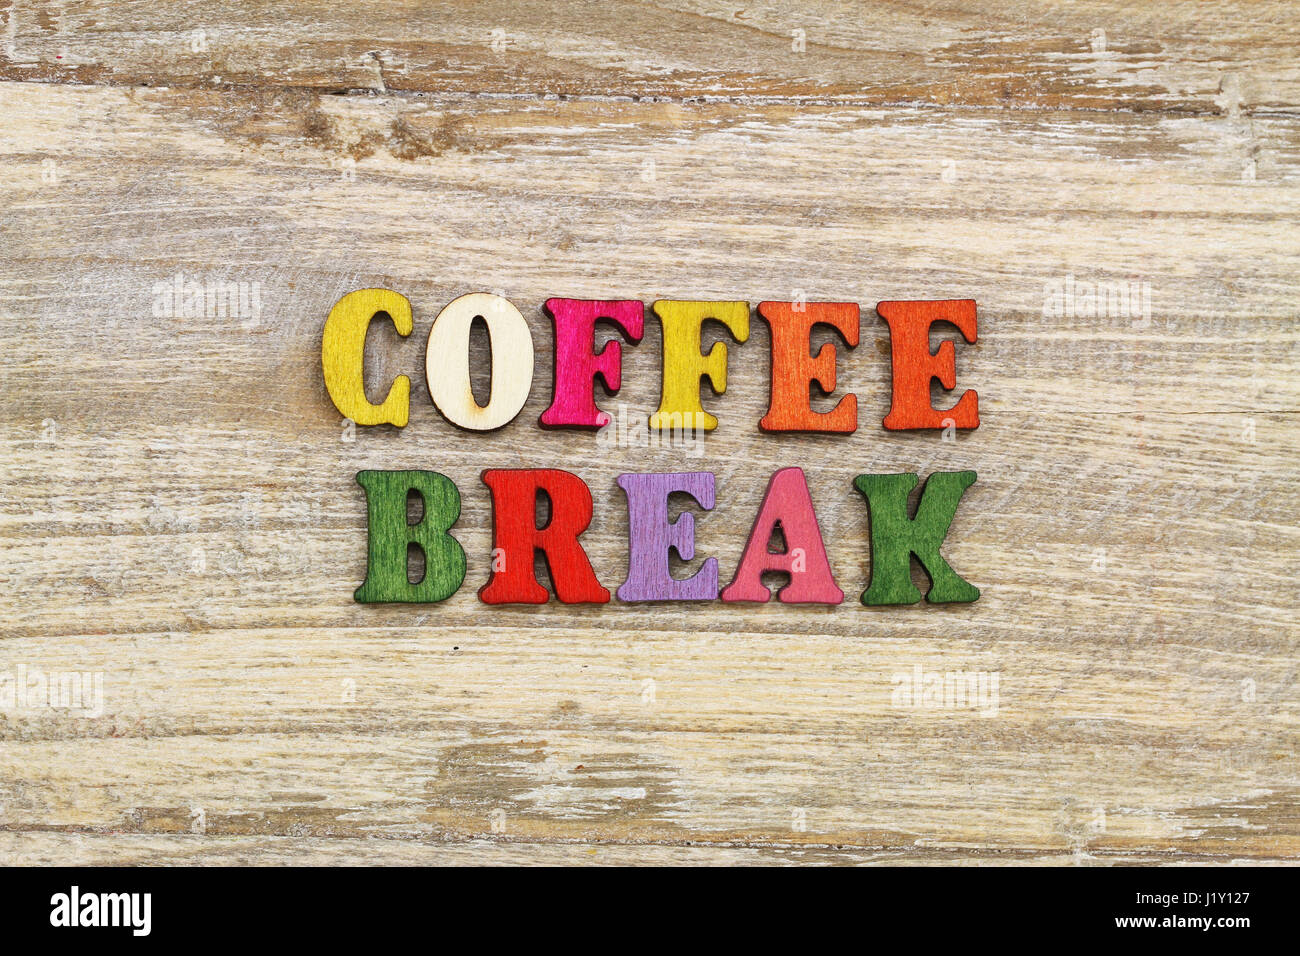 Coffee break written with colorful letters on rustic wooden surface Stock Photo